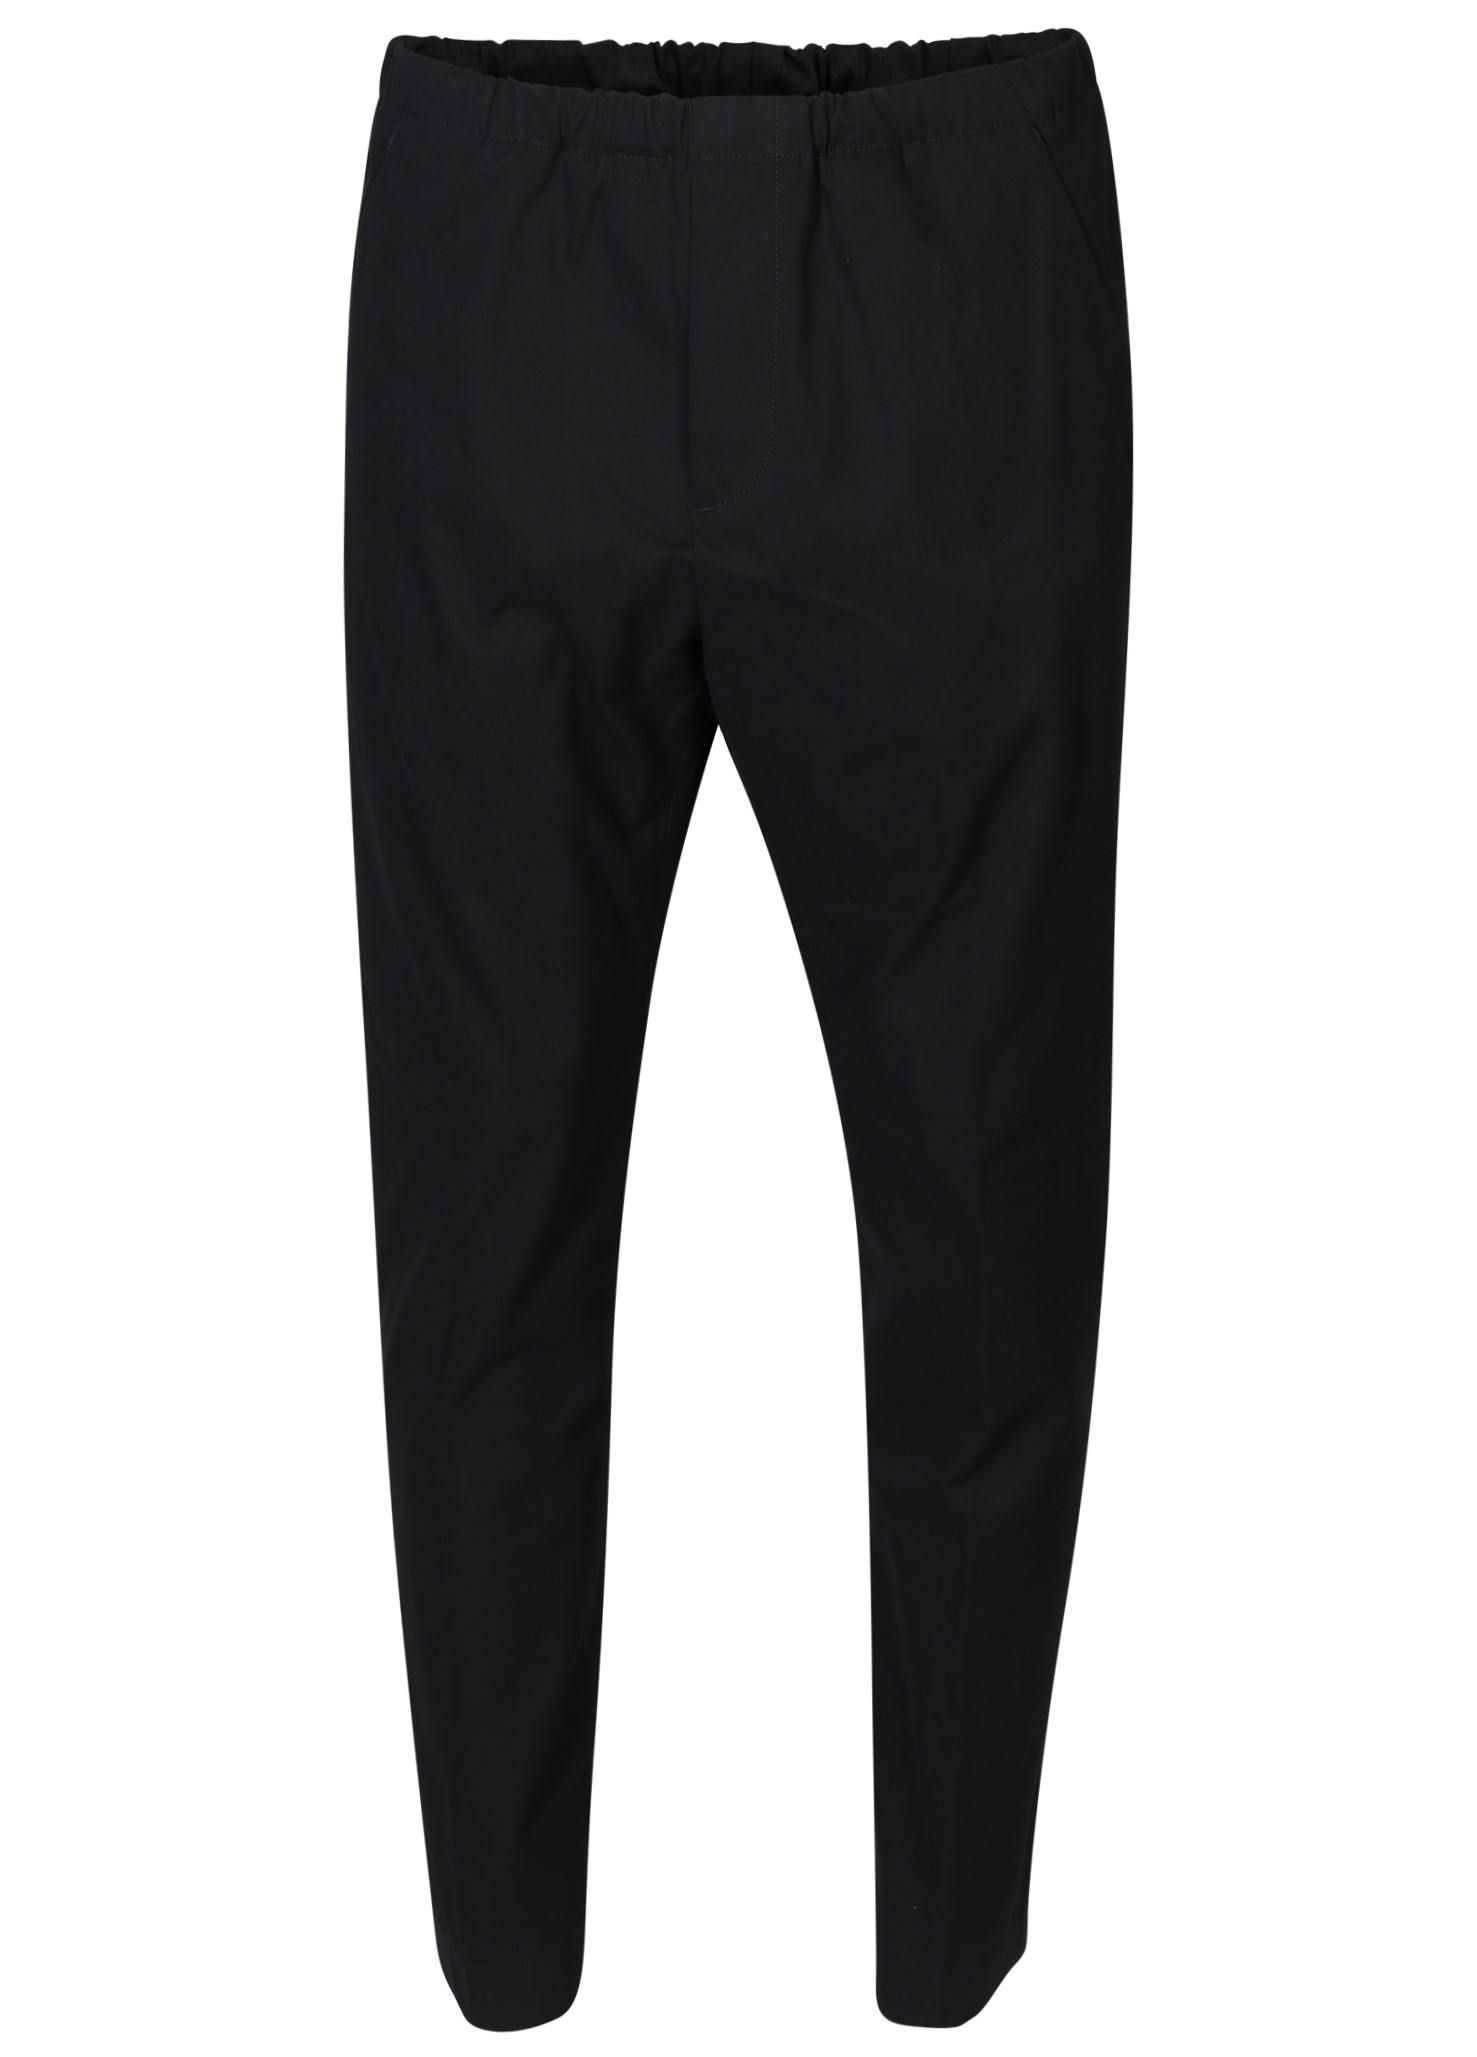 NINE:INTHE:MORNING Mirco Carrot Cotton Stretch Pant in Black 46